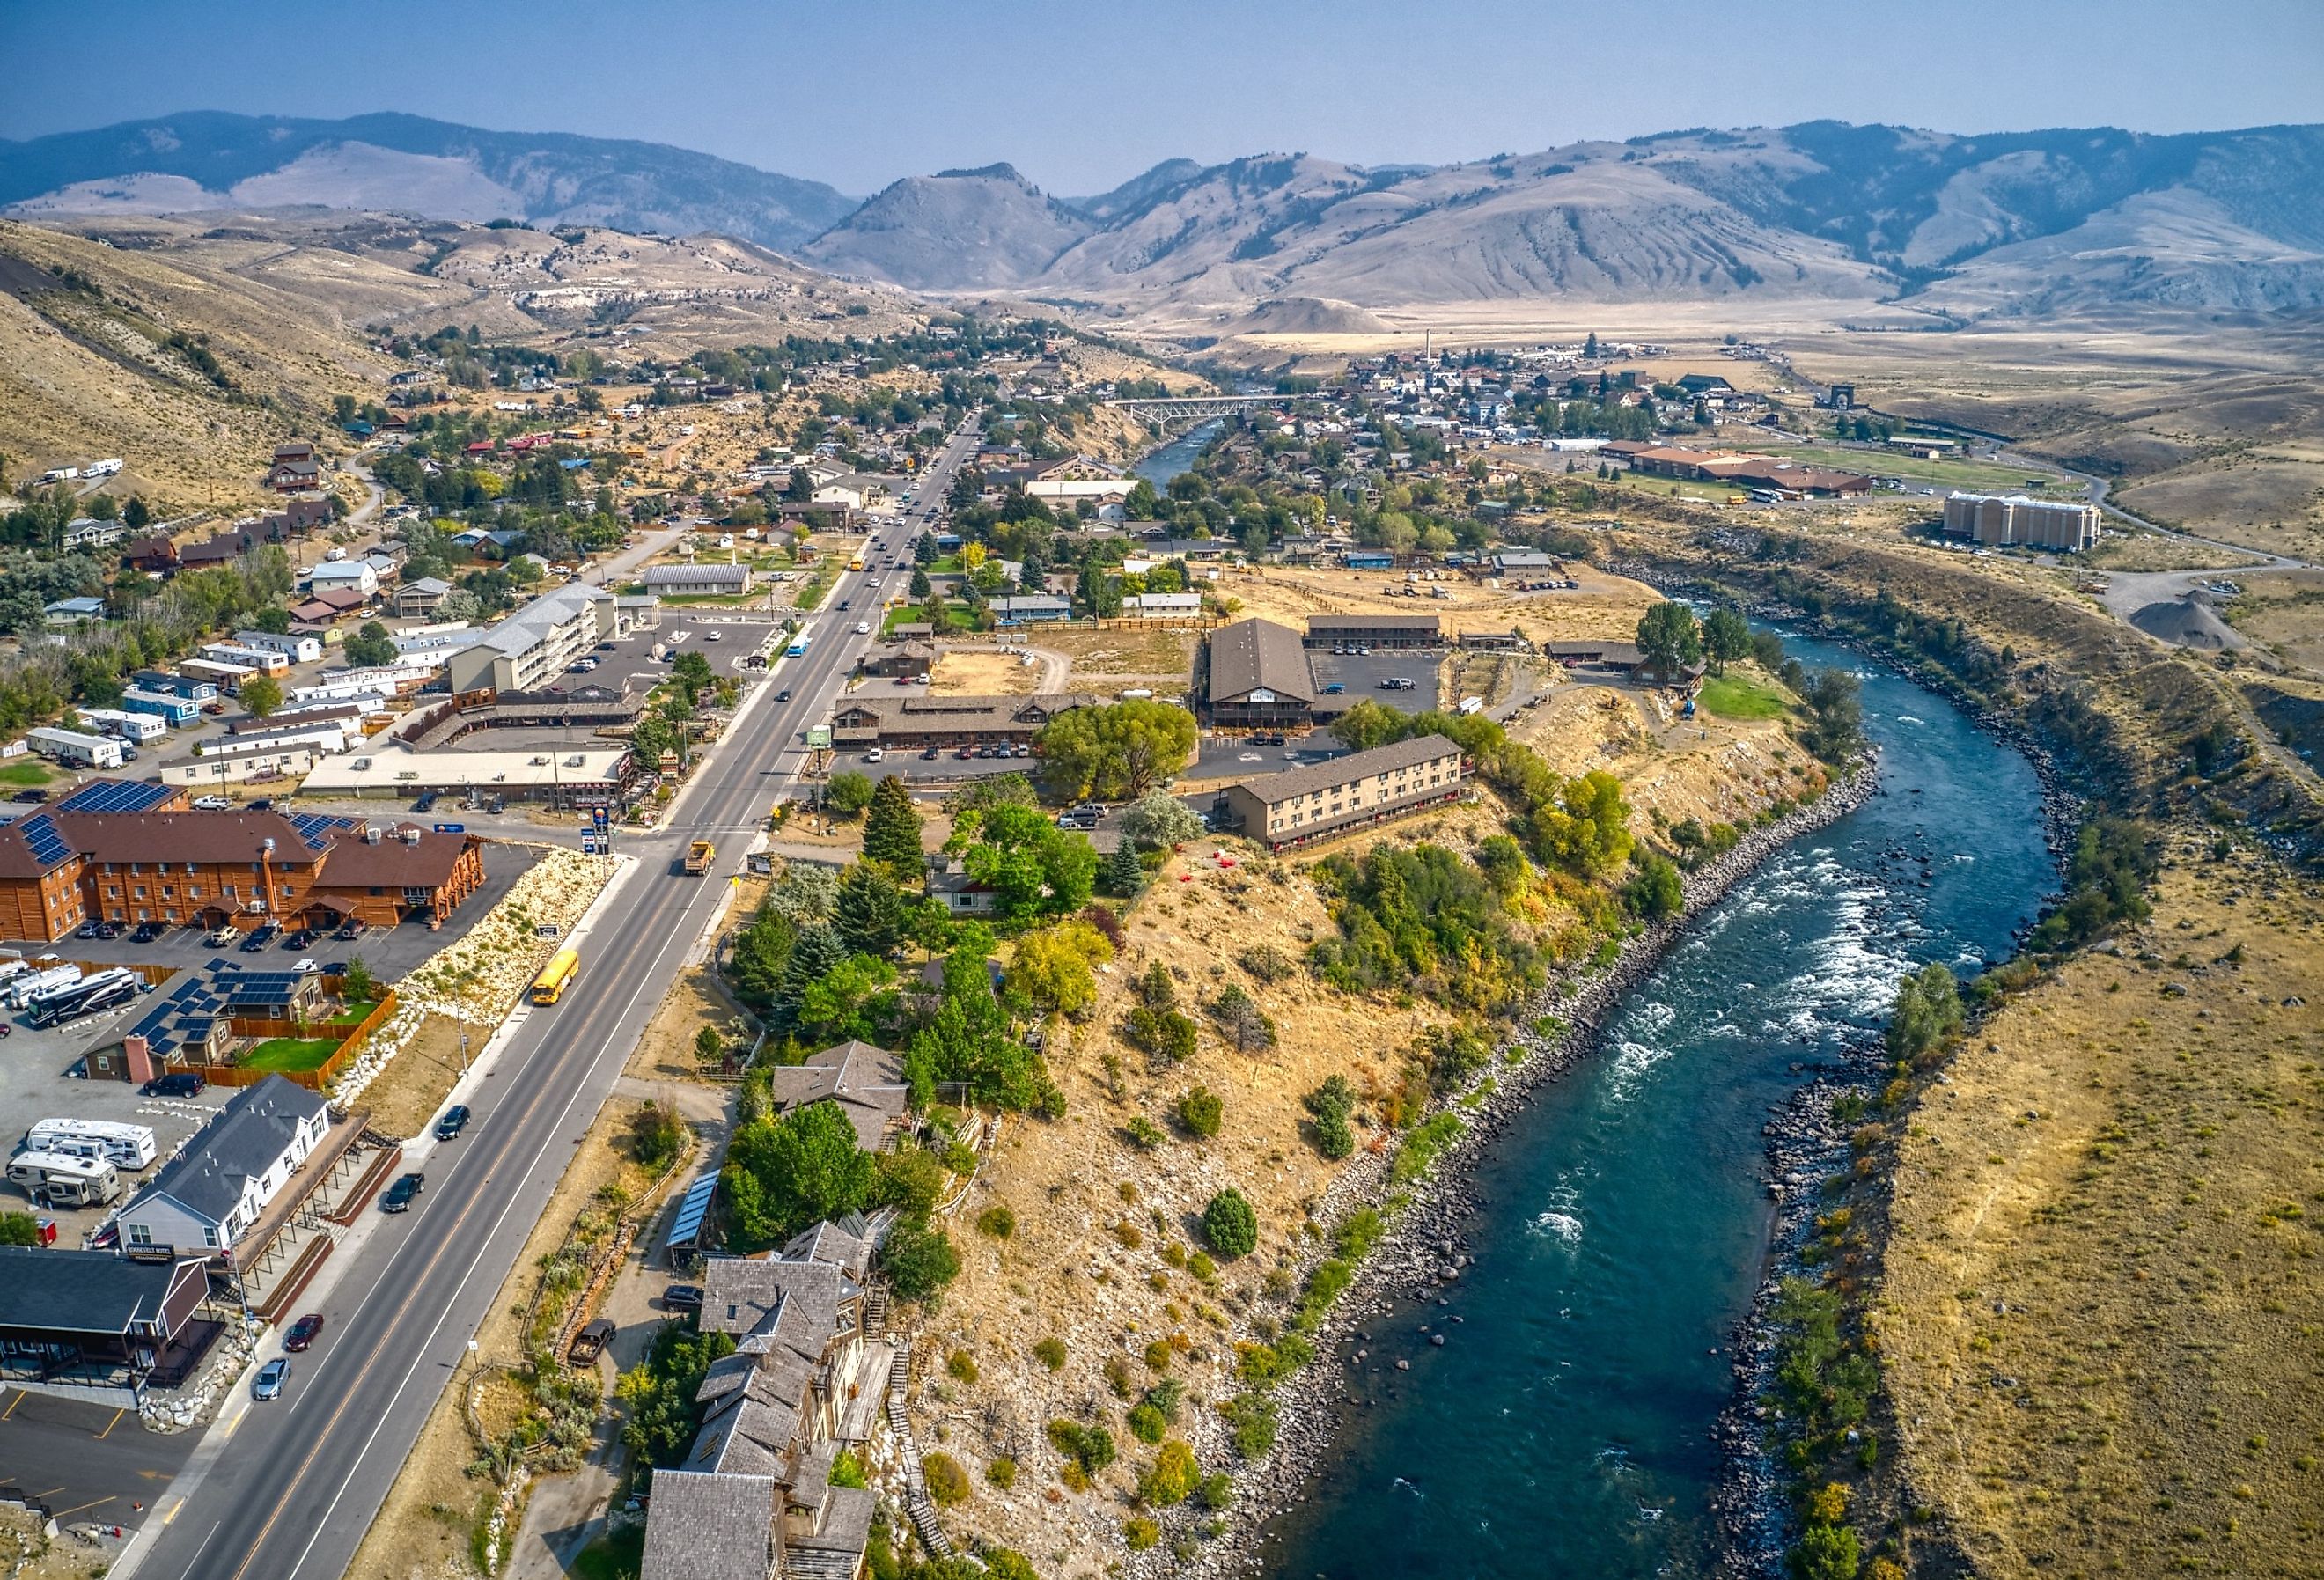 Aerial View of the Town of Gardiner, Montana which borders Yellowstone National Park.